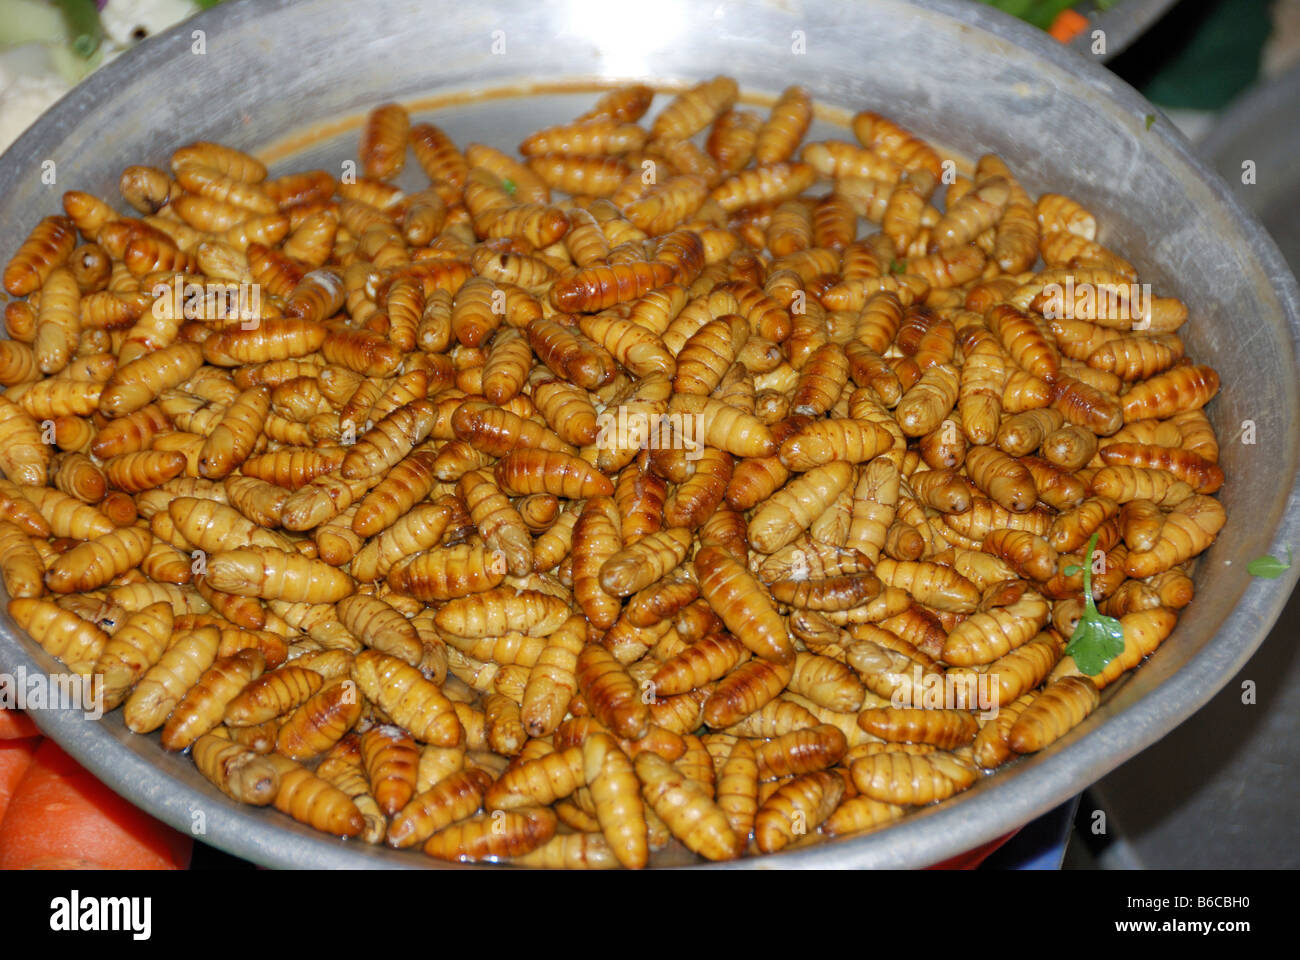 Fried lavae in a wok,Northern Vietnam Stock Photo